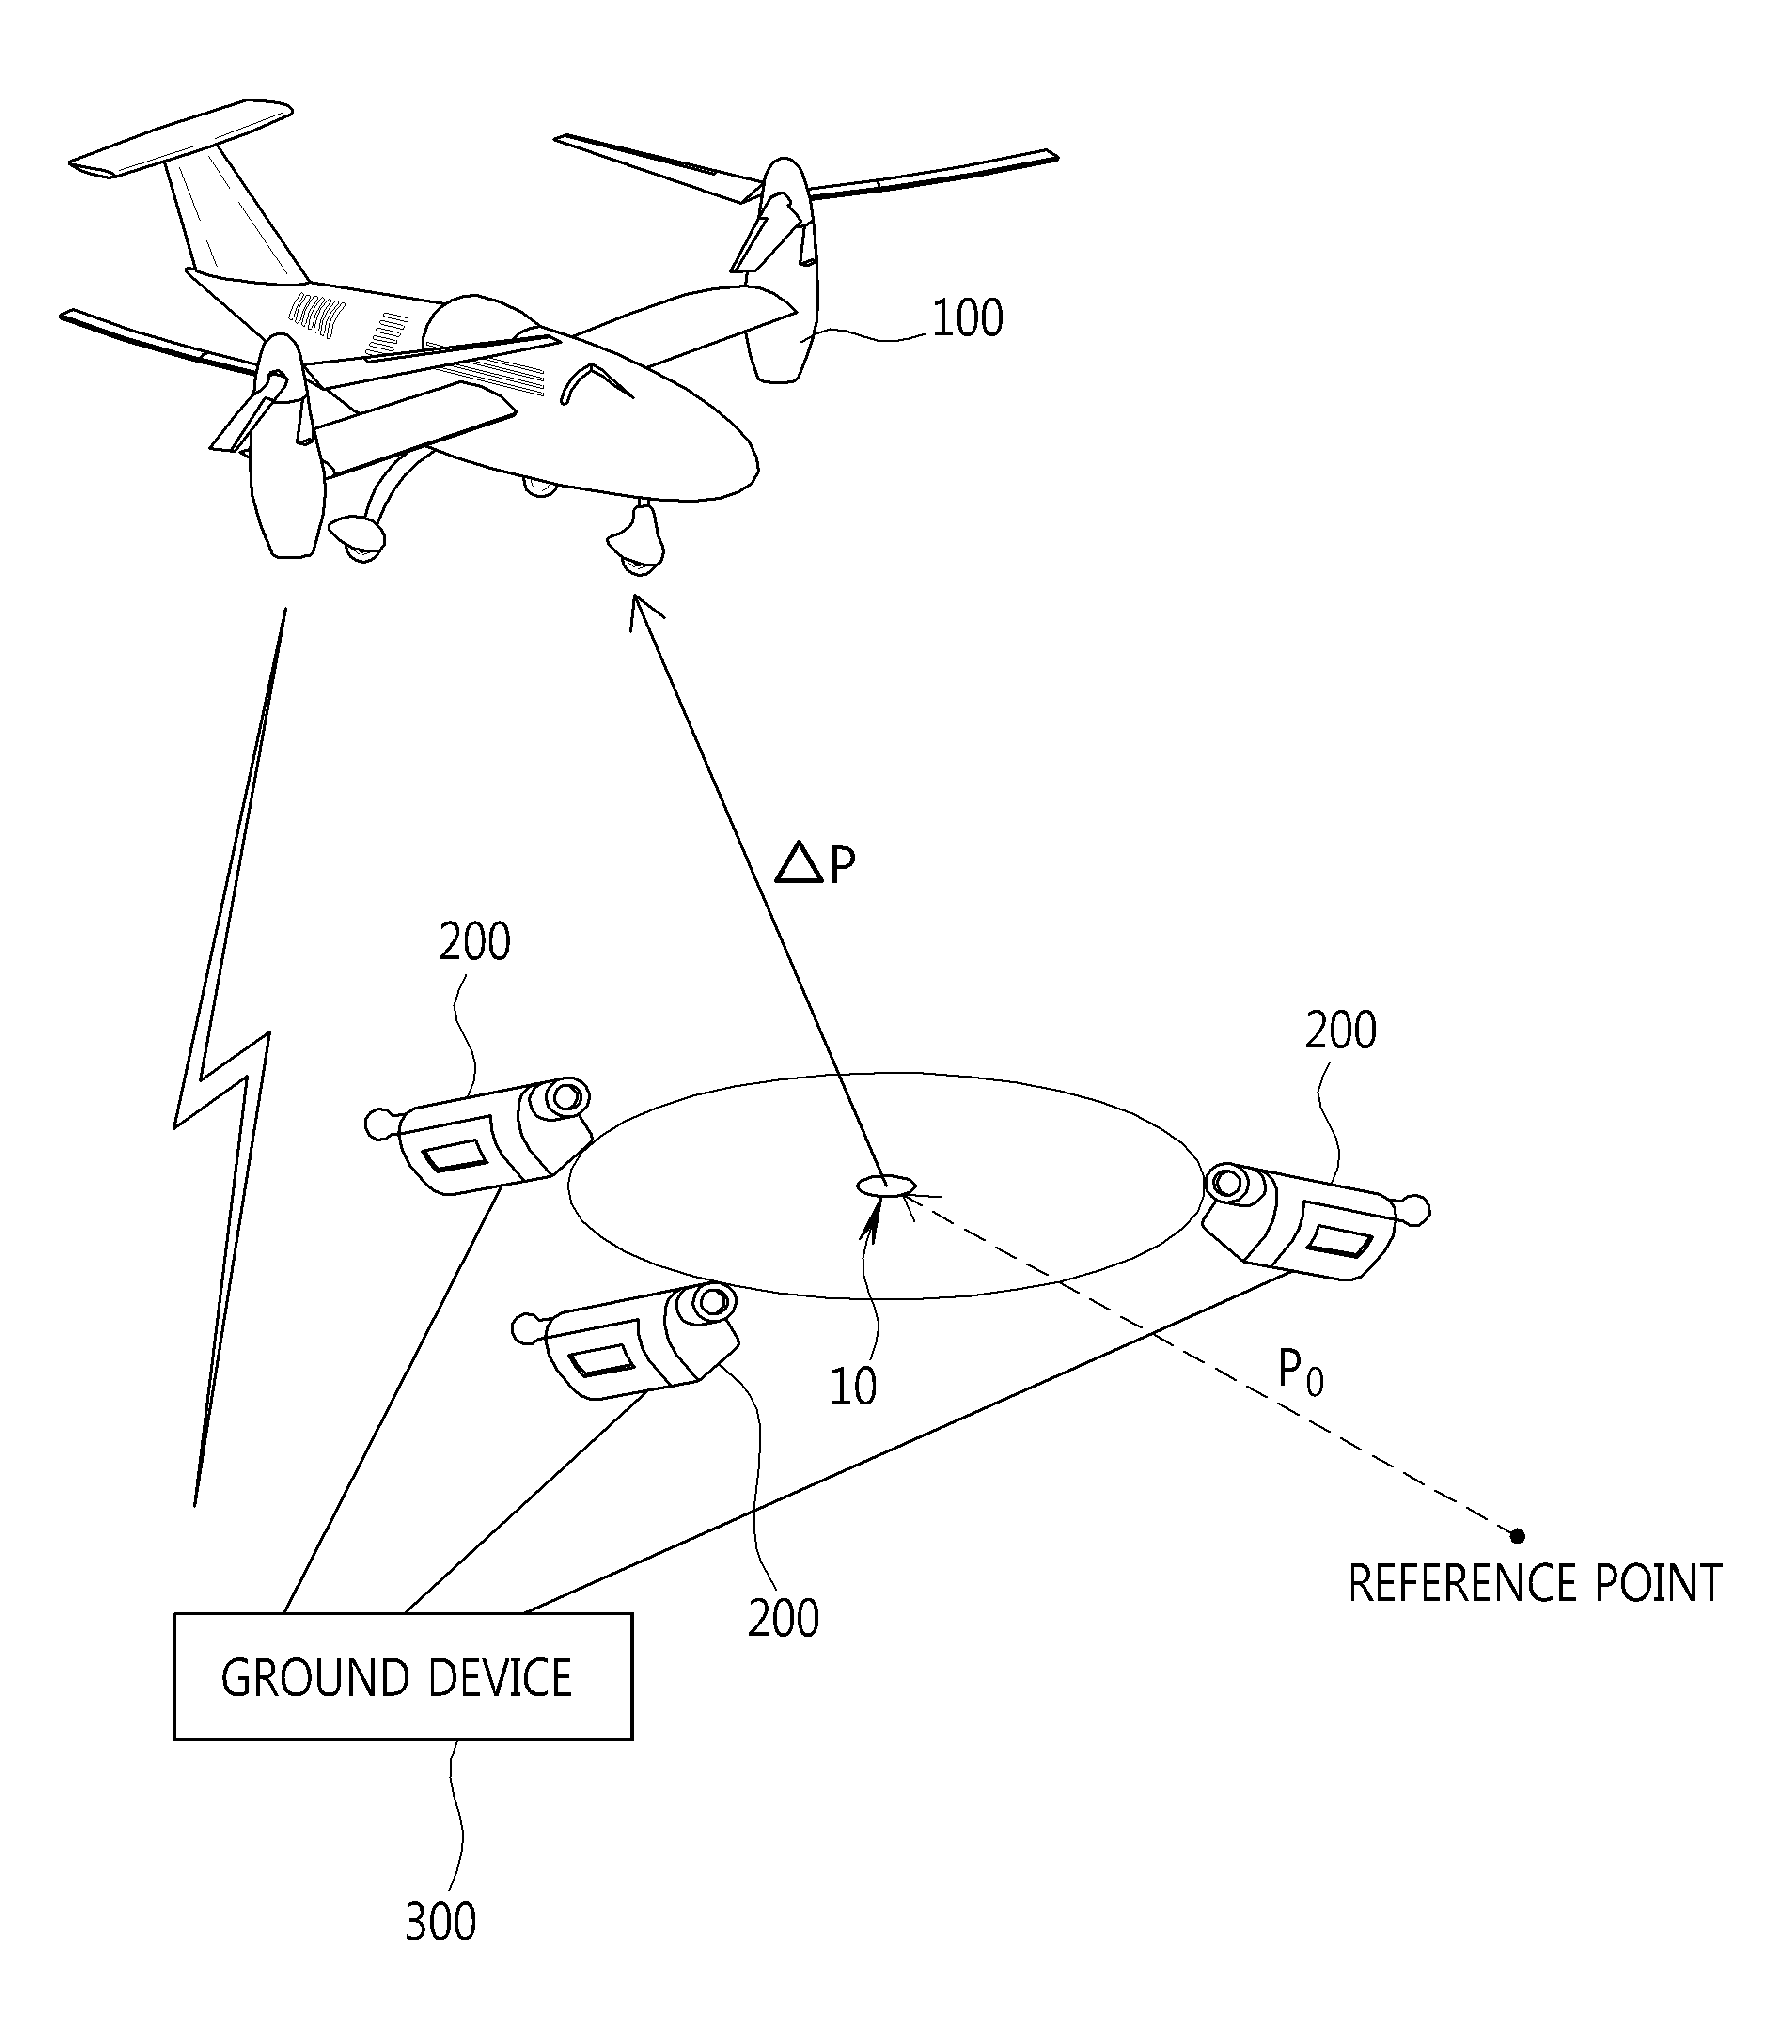 Method and System for Landing of Unmanned Aerial Vehicle